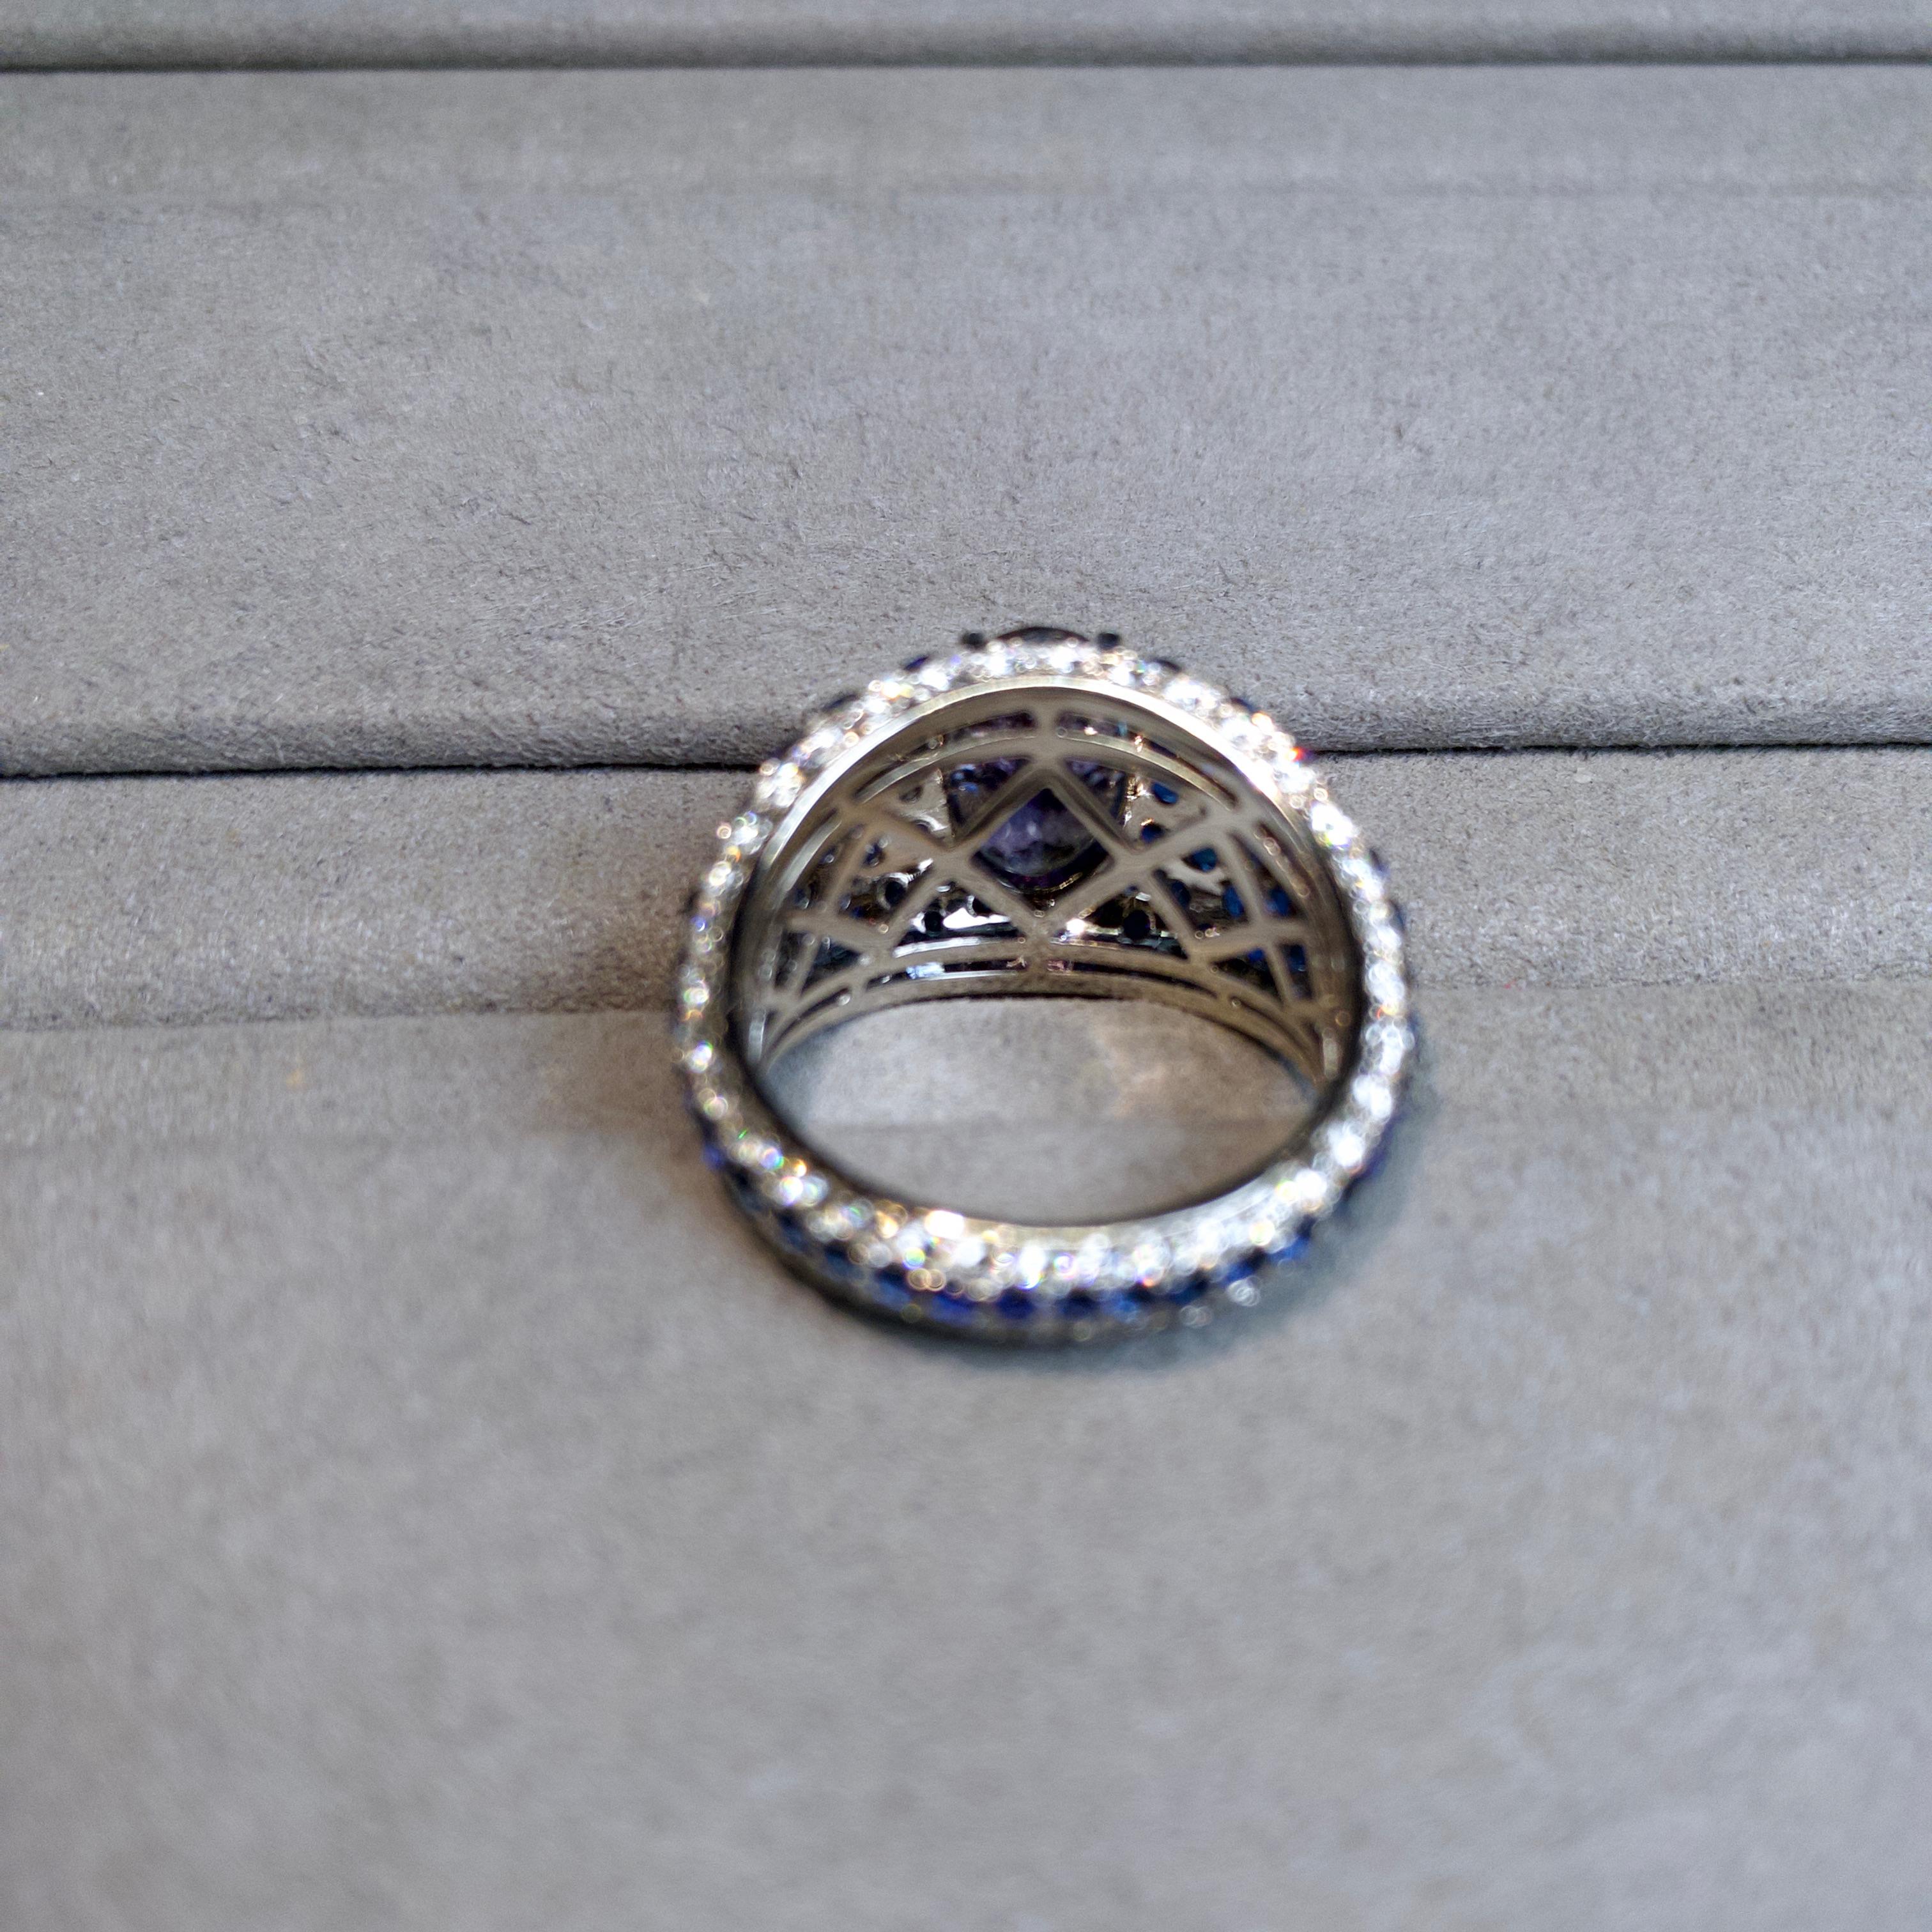 This is a full micro pave setting ring. The whole ring in encrusted in diamonds and blue sapphire. It is extremely time consuming to complete this ring. This is the only ring so far that comes with full micro pave setting. In order for the Tanzanite